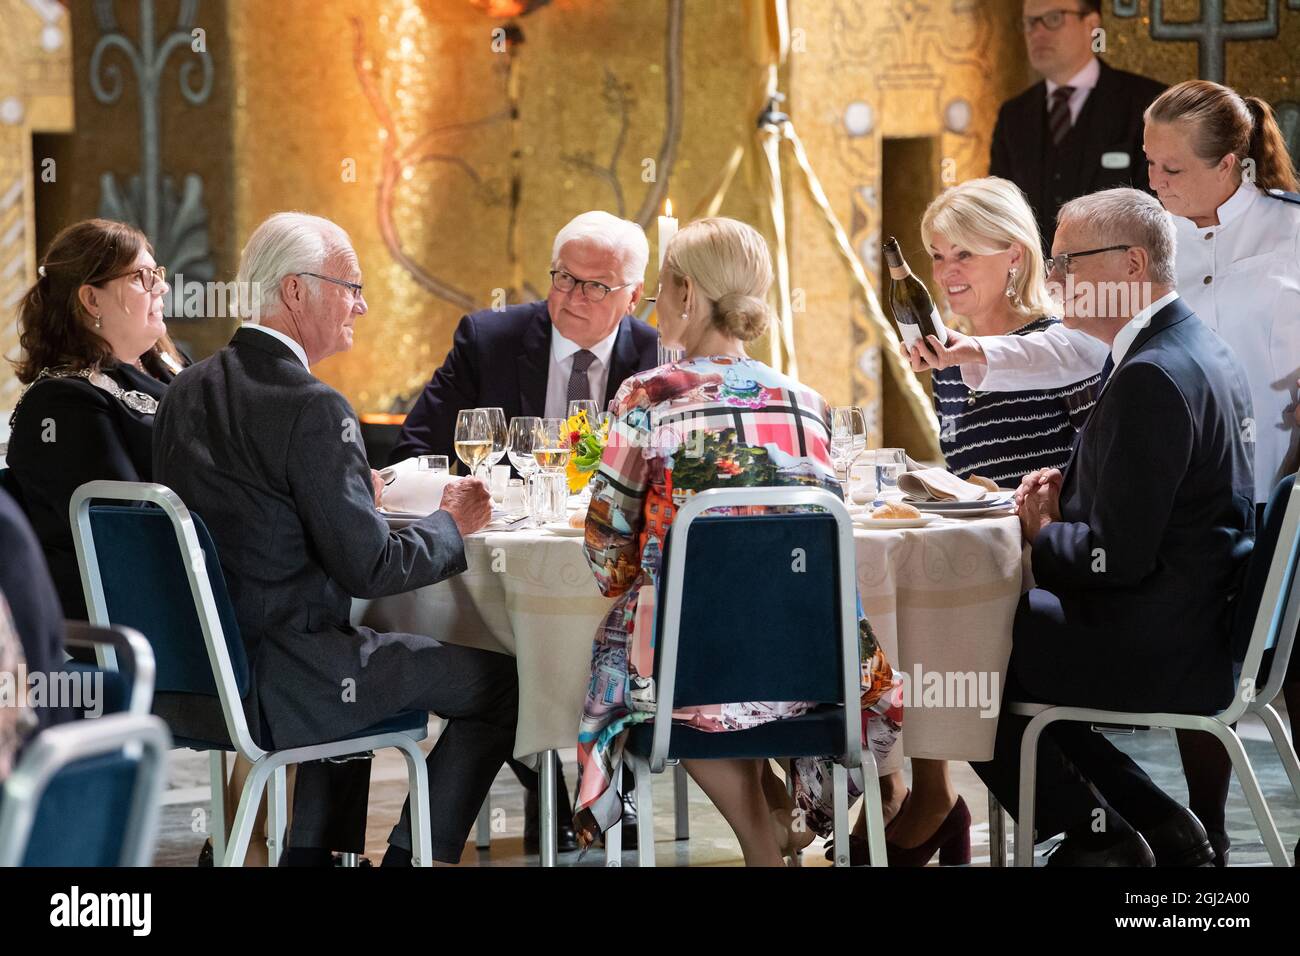 08 September 2021, Sweden, Södertälje: Federal President Frank-Walter Steinmeier (centre) sits with King Carl XVI Gustaf of Sweden (2nd from left) and Cecilia Brinck (l-r), Chairwoman of Stockholm City Council, Anna König Jerlmyr, Lord Mayor of Stockholm, Anna Hallberg, Swedish Minister for Trade, and Stephan Steinlein, Head of the Office of the Federal President, at a lunch in Stockholm City Hall. President Steinmeier and his wife are in Sweden on a three-day state visit at the invitation of the Swedish royal couple. Photo: Bernd von Jutrczenka/dpa Stock Photo